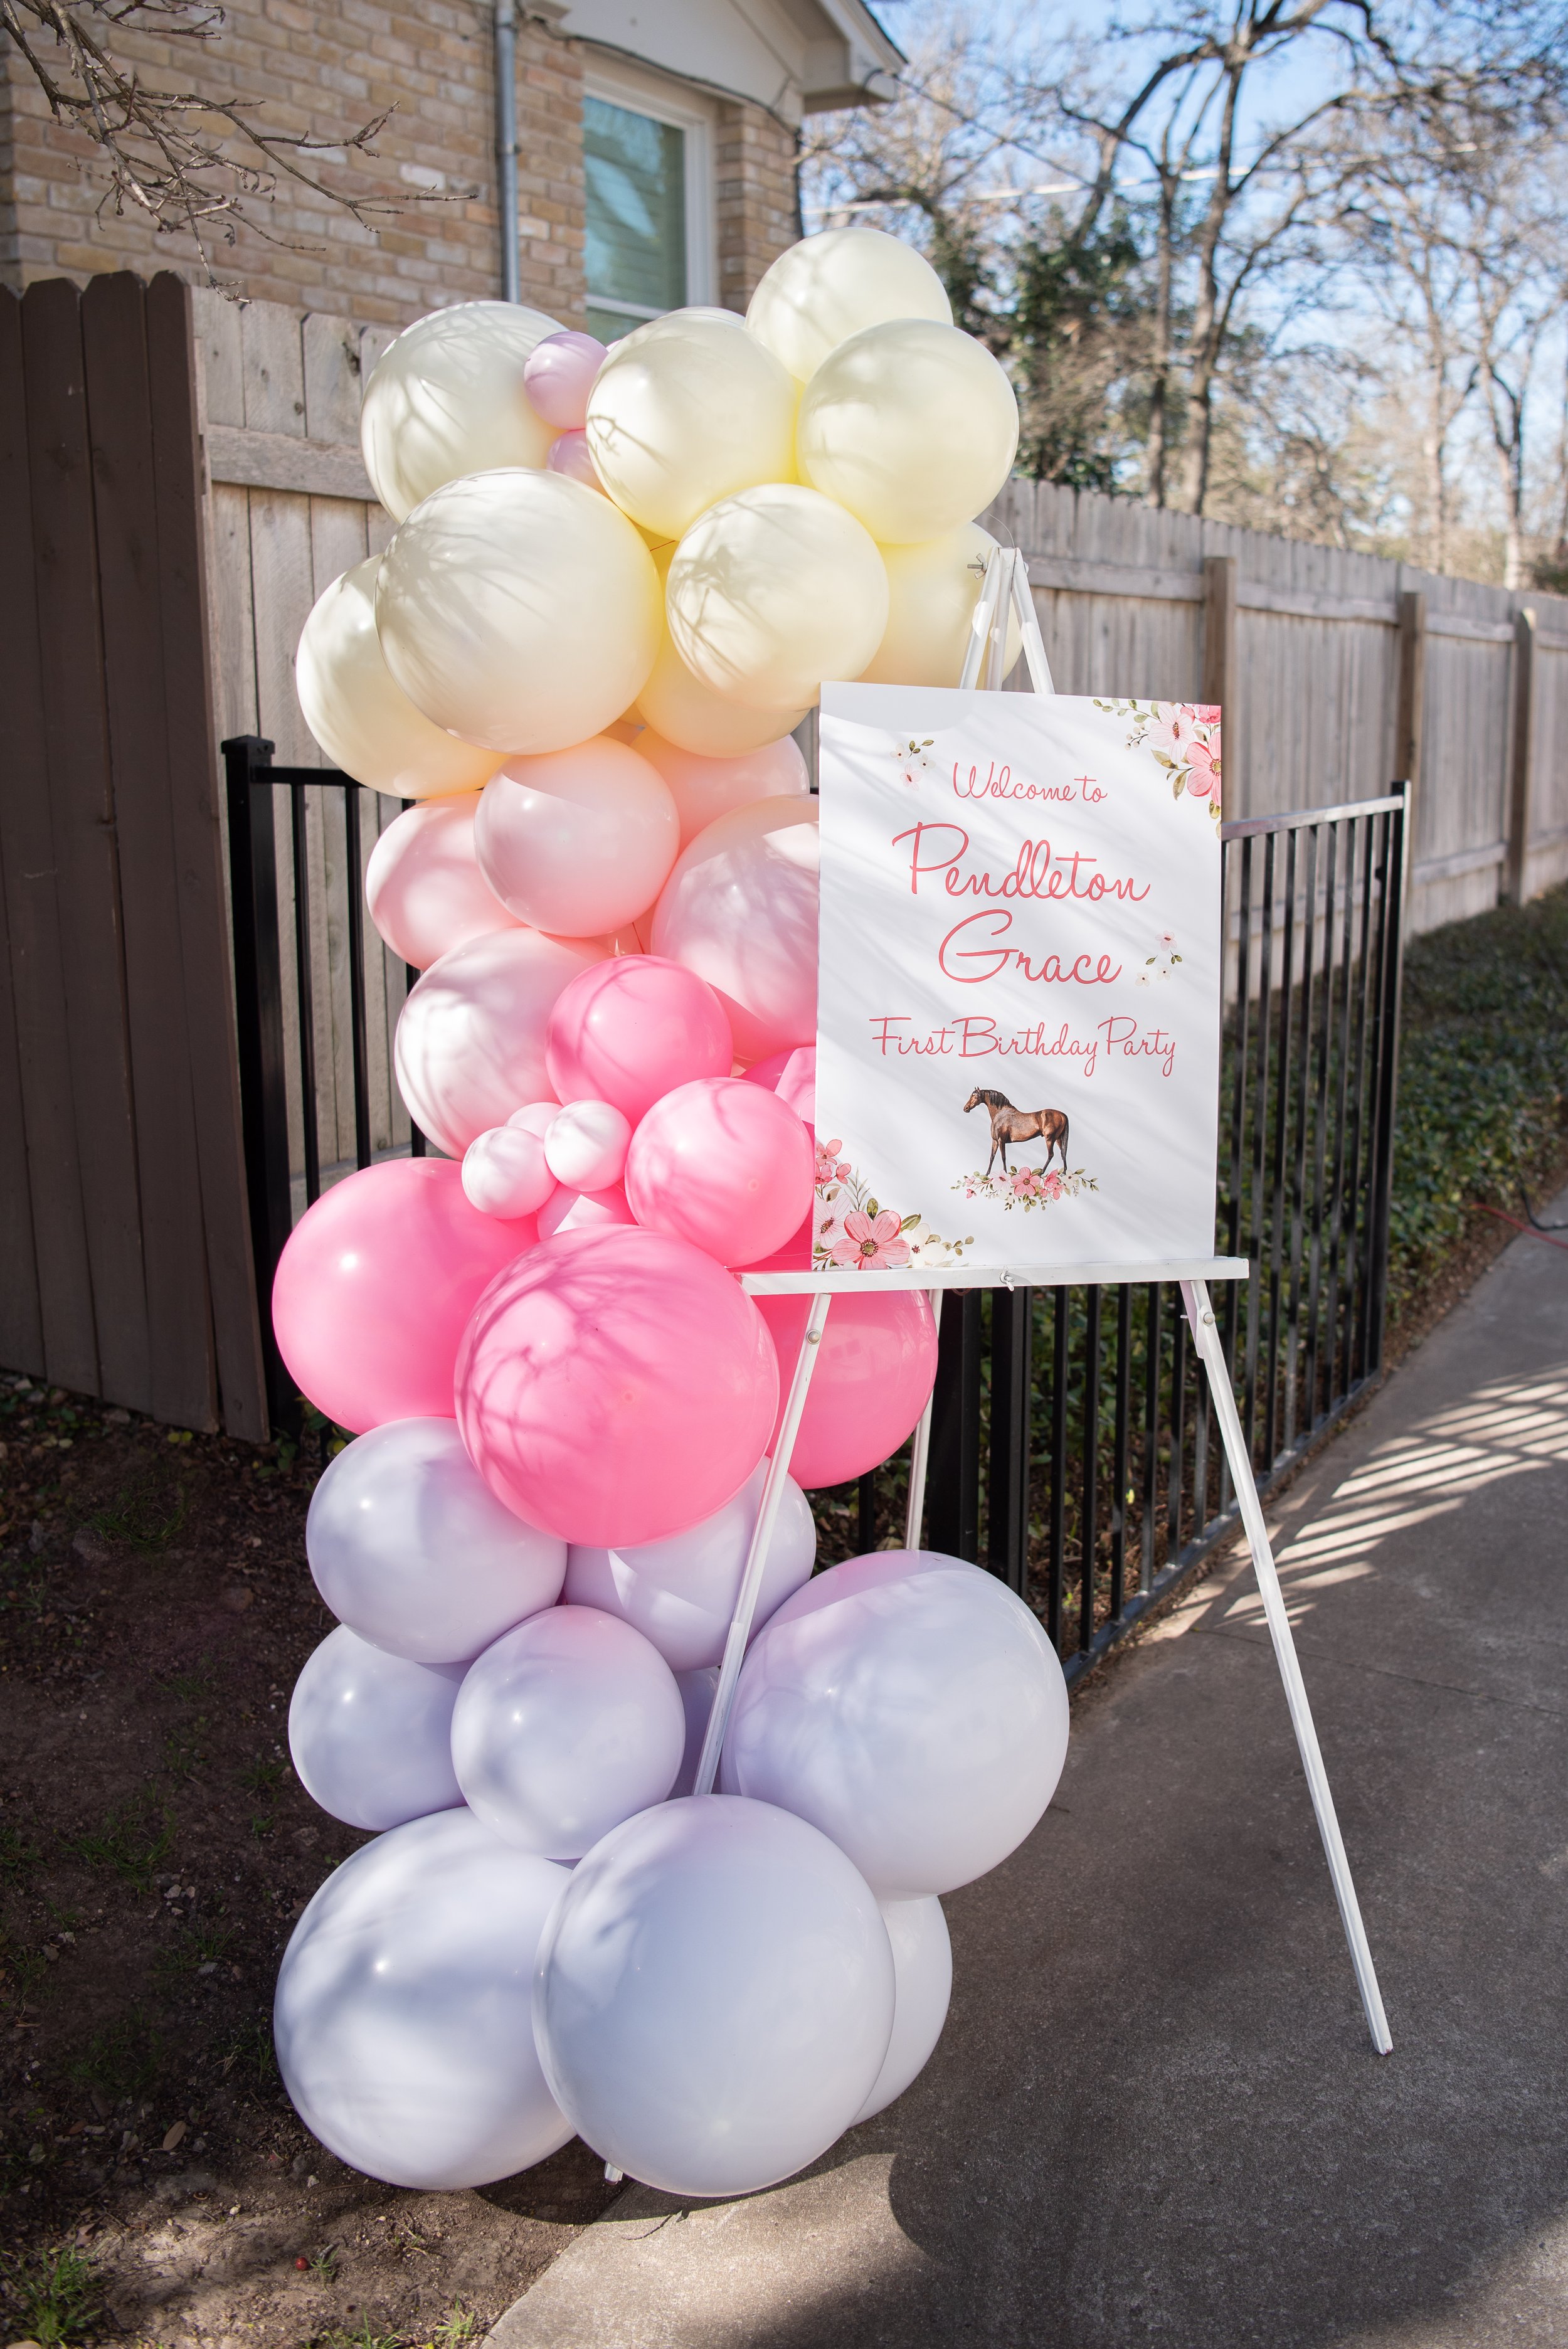 Welcome sign and balloon garland for a pony-themed first birthday party. Get details from event designer Carolina of MINT Event Design in Austin, TX at www.minteventdesign.com!